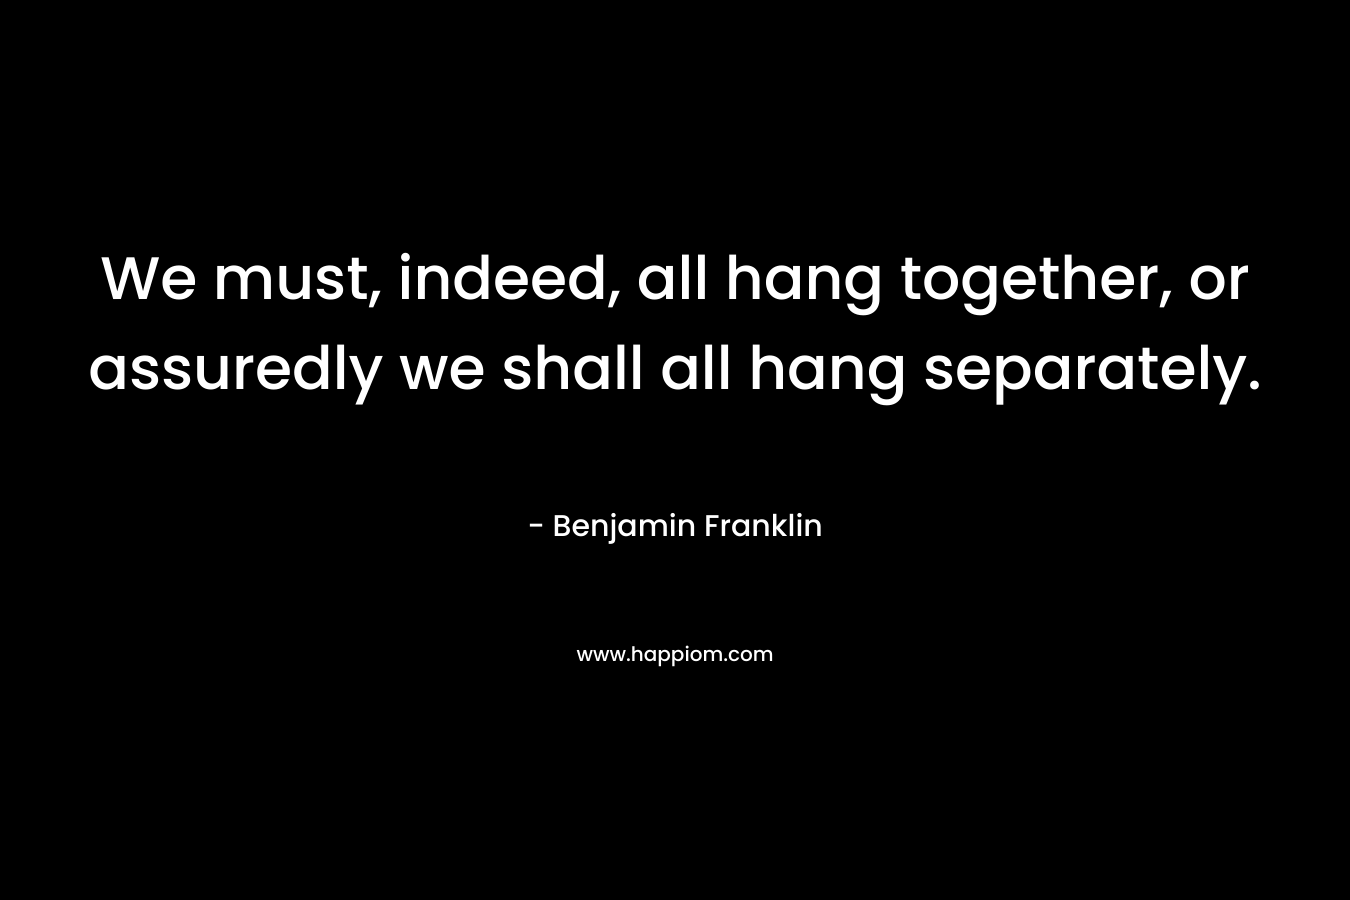 We must, indeed, all hang together, or assuredly we shall all hang separately.